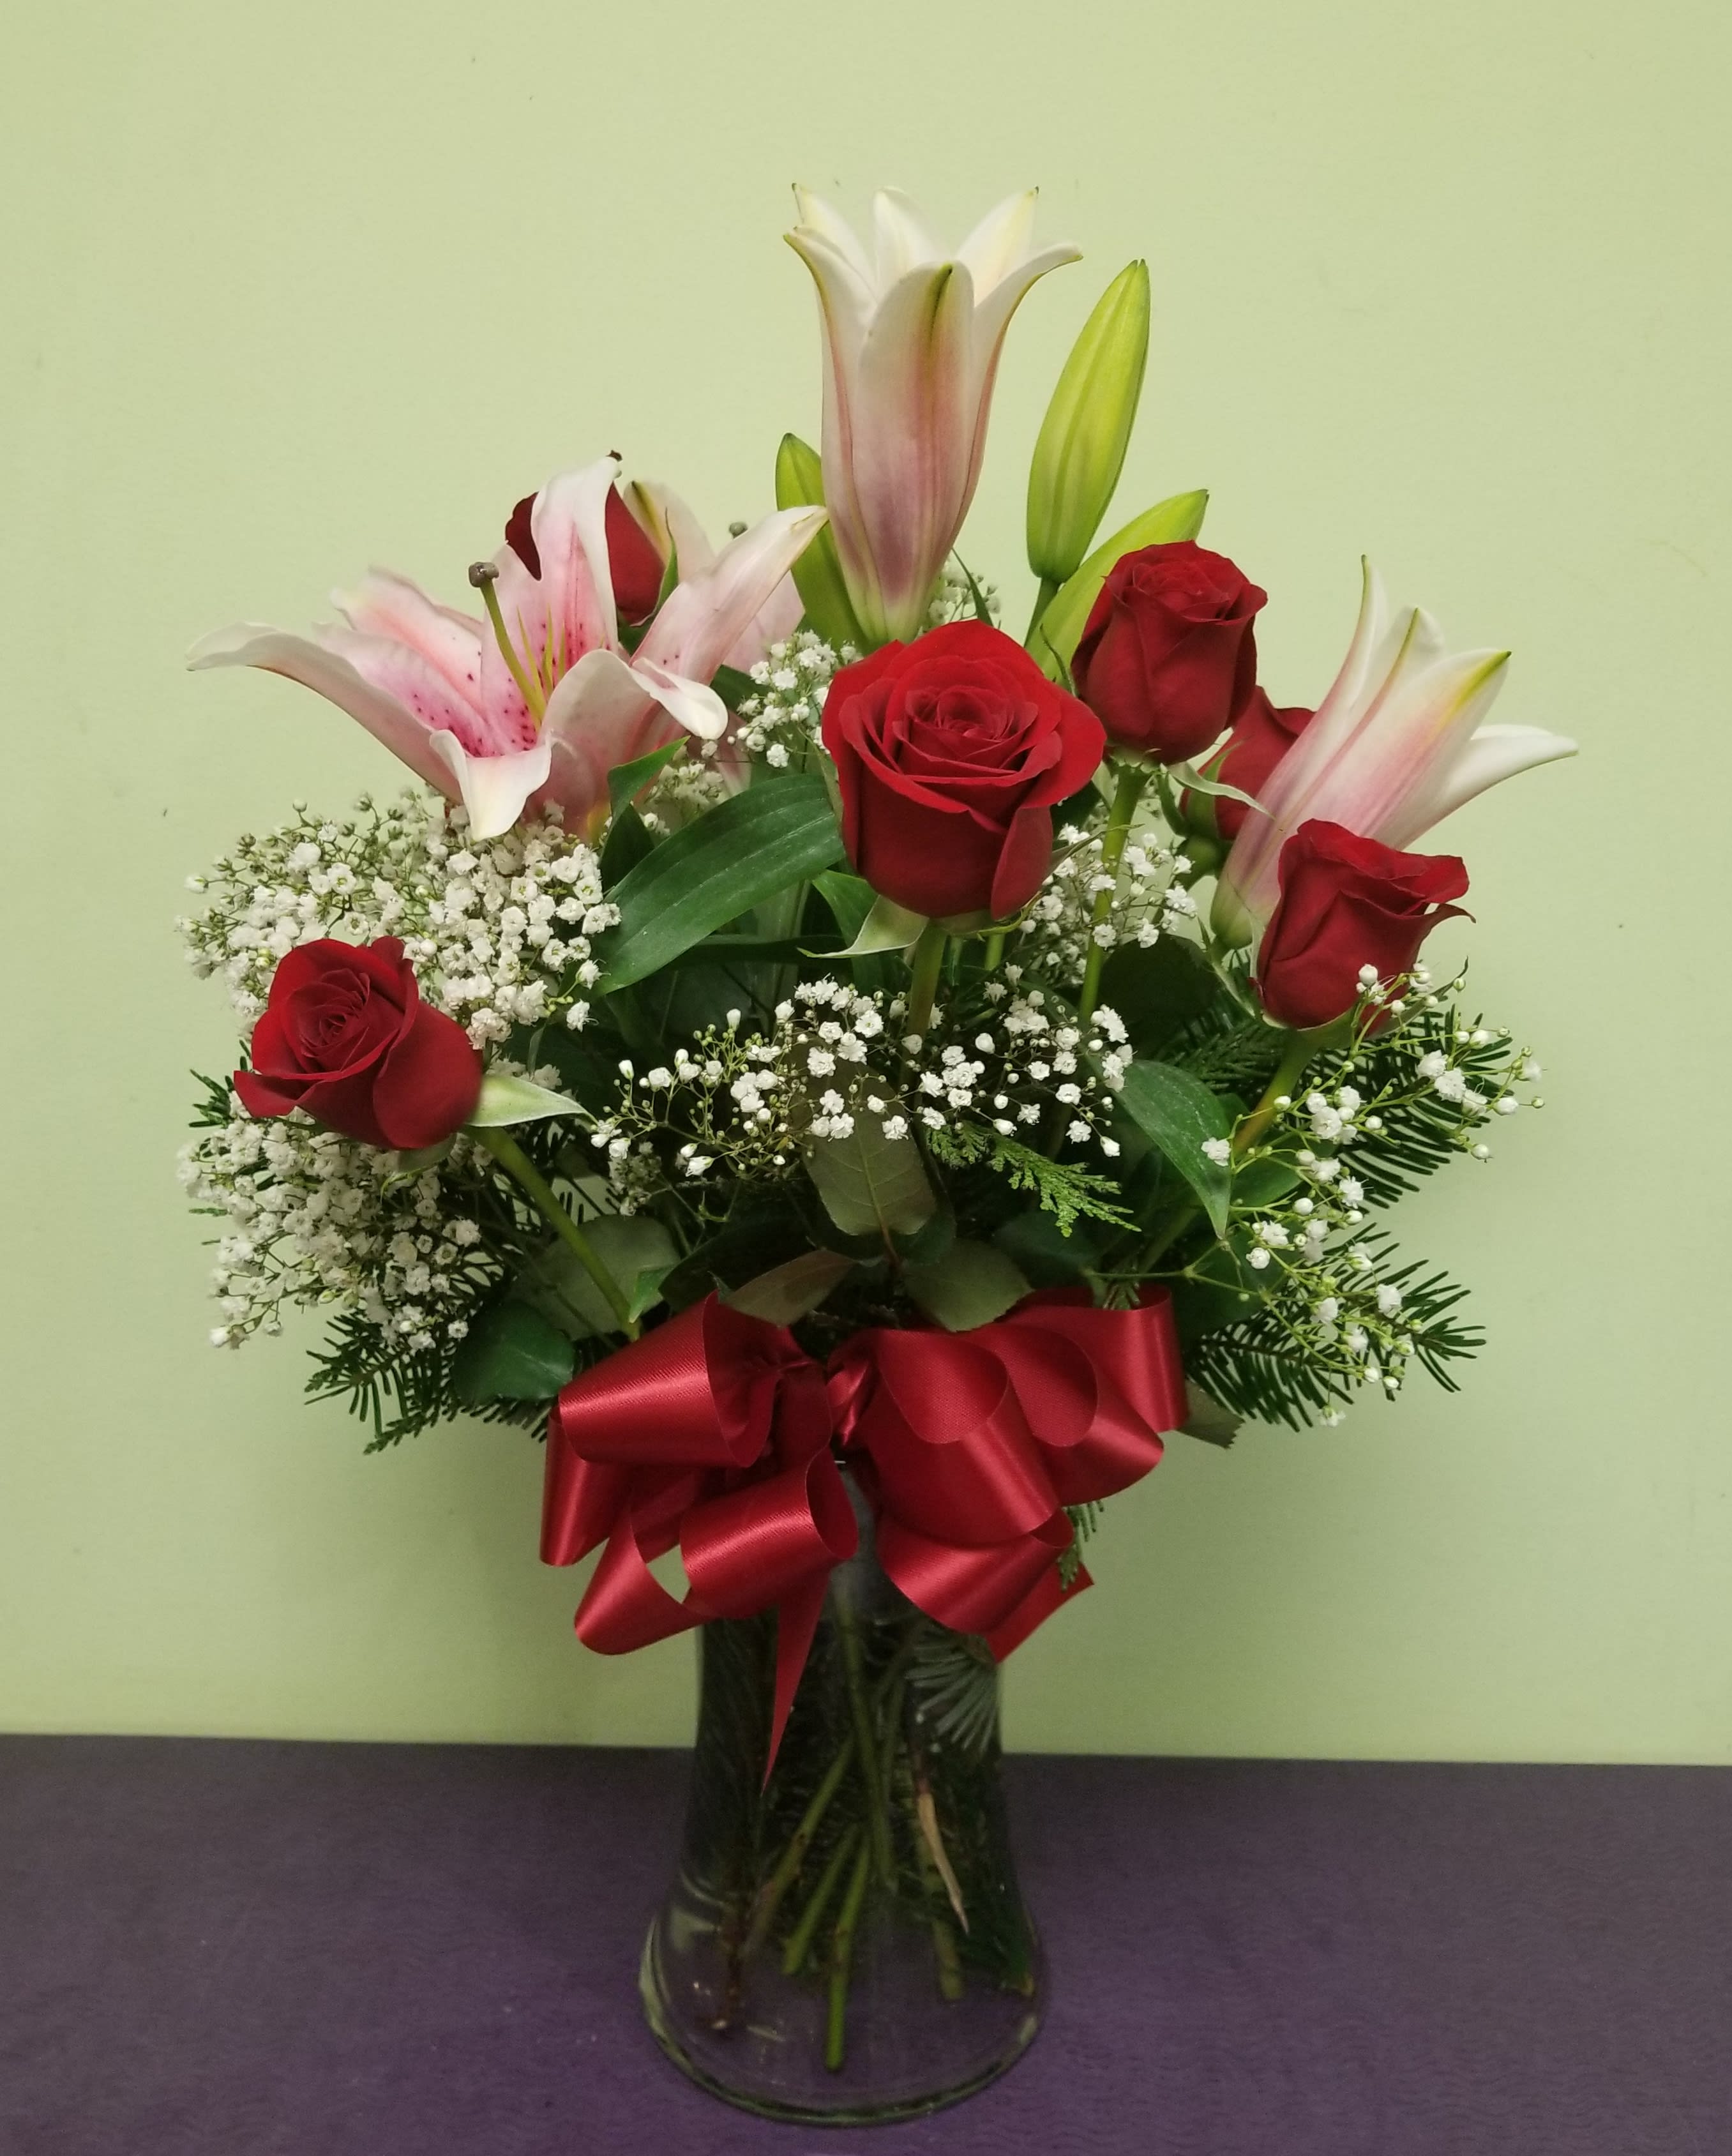 Hugs and Kisses - Send some hugs and kisses their way with this lovable arrangement!